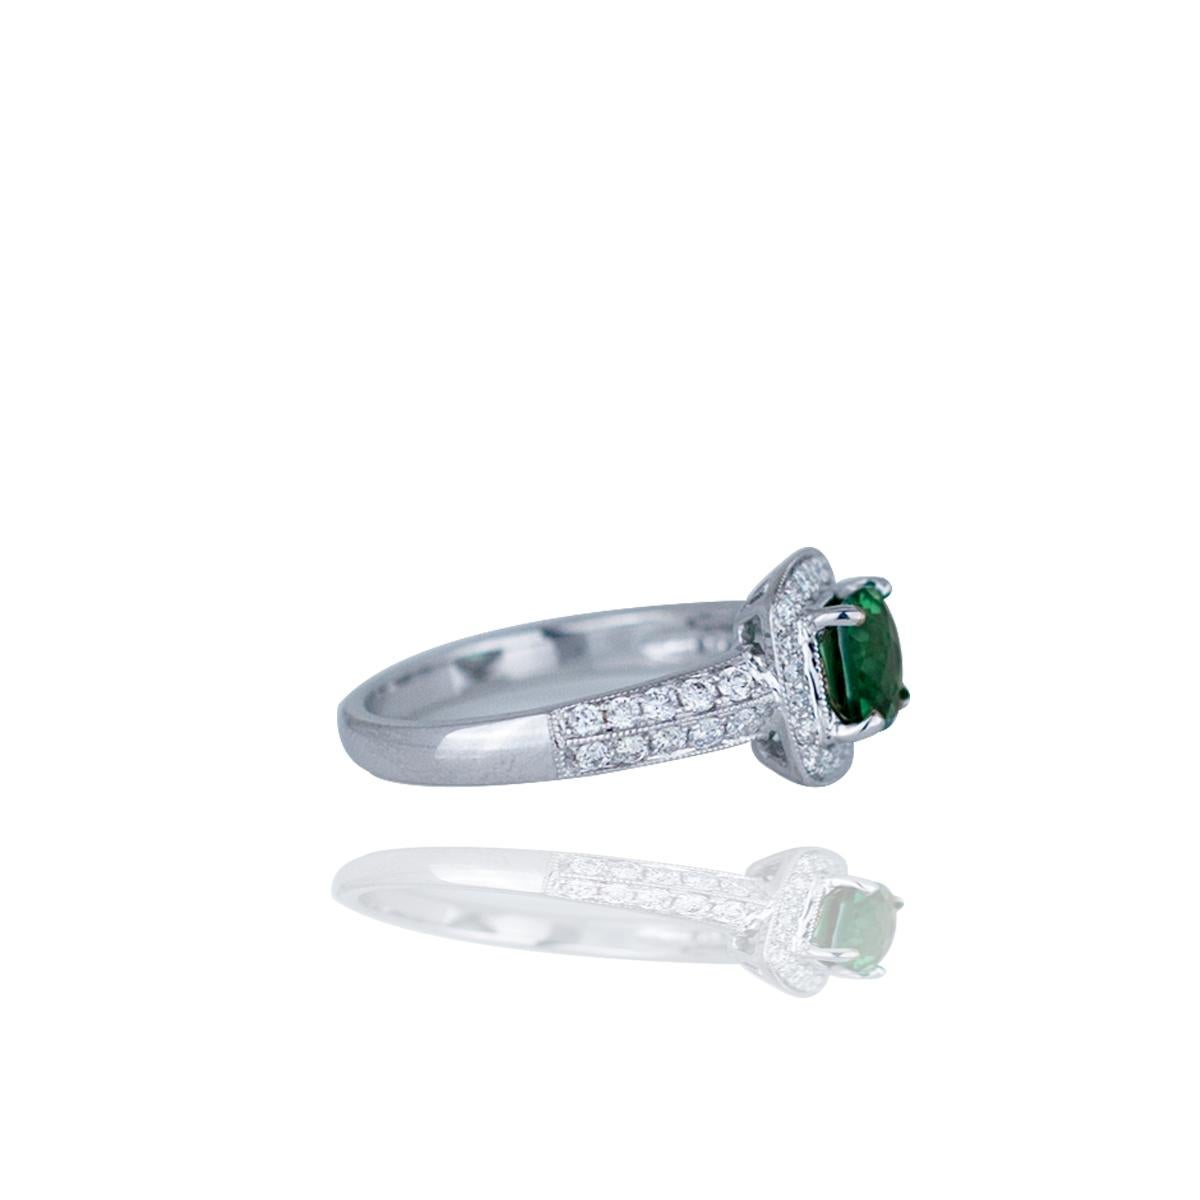 Halo, Cushion Green Stone, Diamond Pave, 14Kt White Gold 
Diamond pave set in halo and shank are .40 carat as inscribed inside shank and hallmarked, 14 karat 
Center brilliant green stone center is a cushion measuring 5.75 mm. Top of halo measures